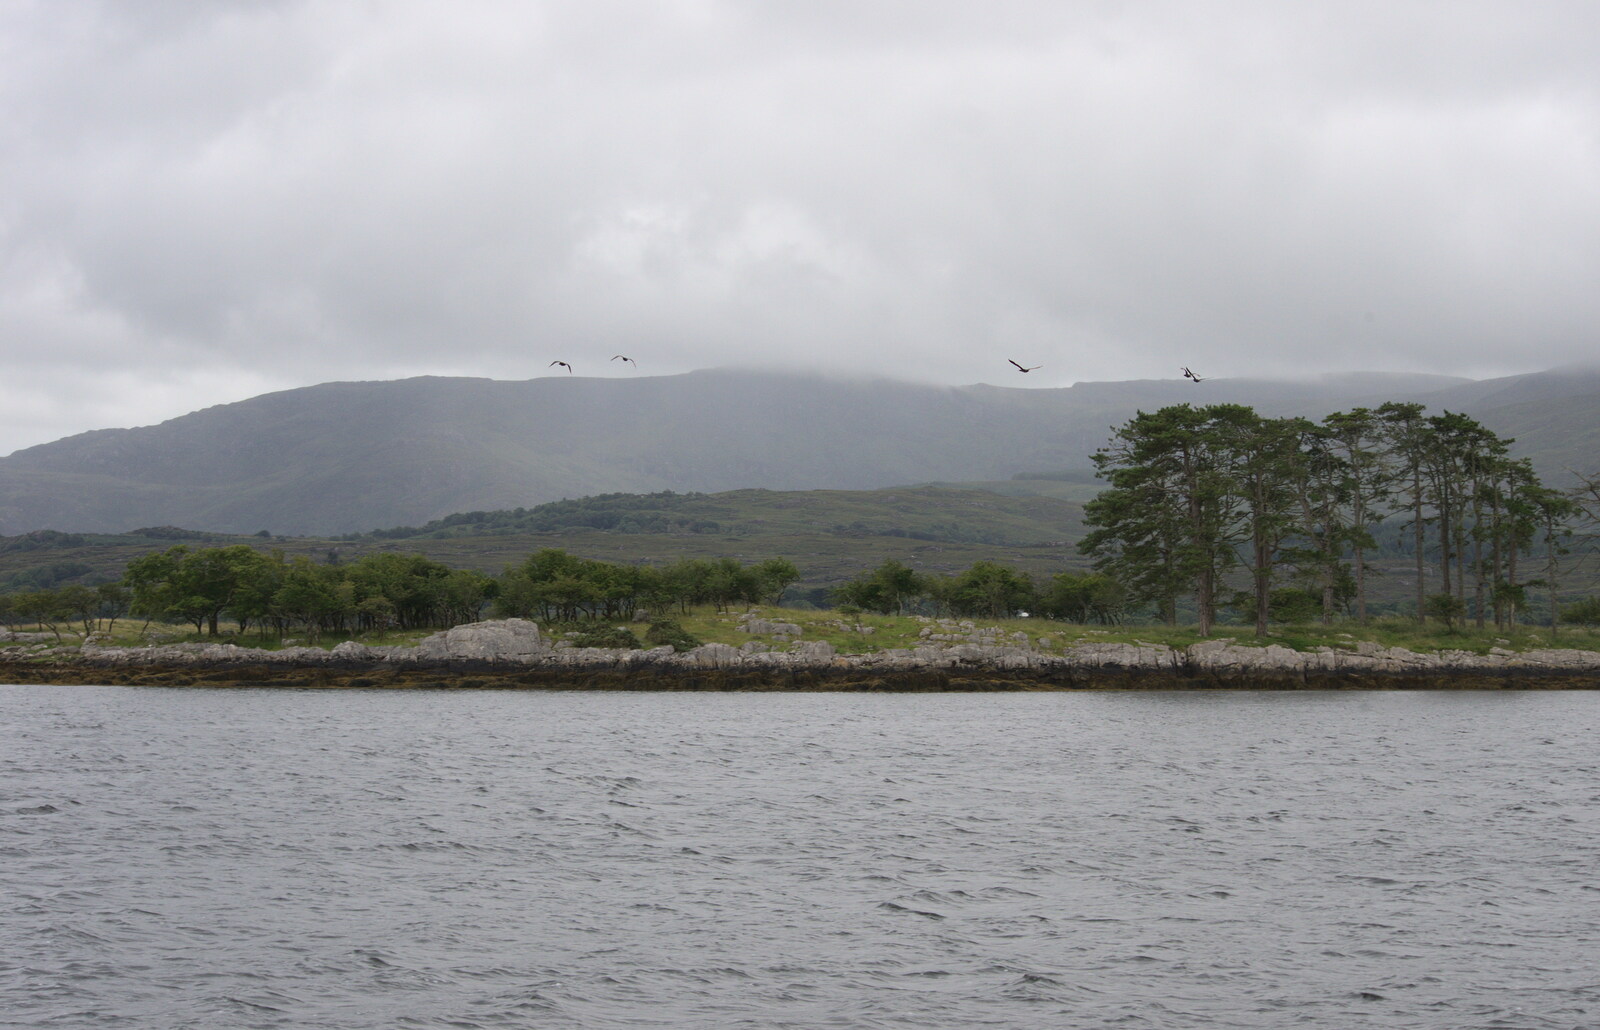 Lonely pine trees on the beach from A Seafari Boat Trip, Kenmare, Kerry, Ireland - 3rd August 2017